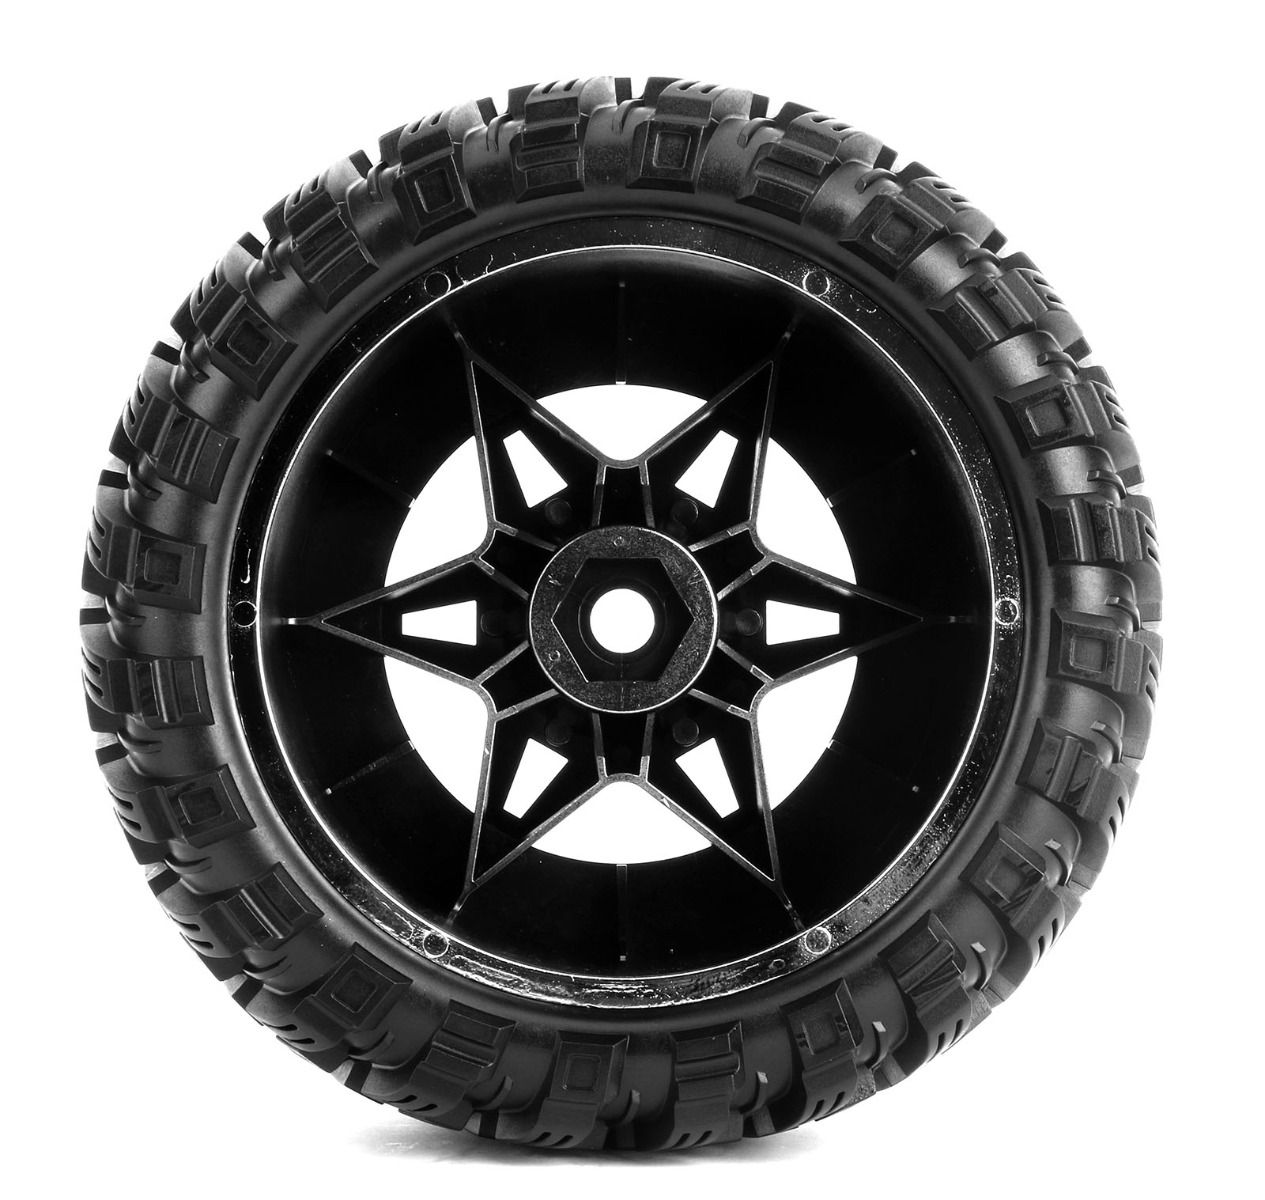 Powerhobby PHT3279 Black Armor X Belted Pre-Mounted Tires FOR Traxxas X-Maxx